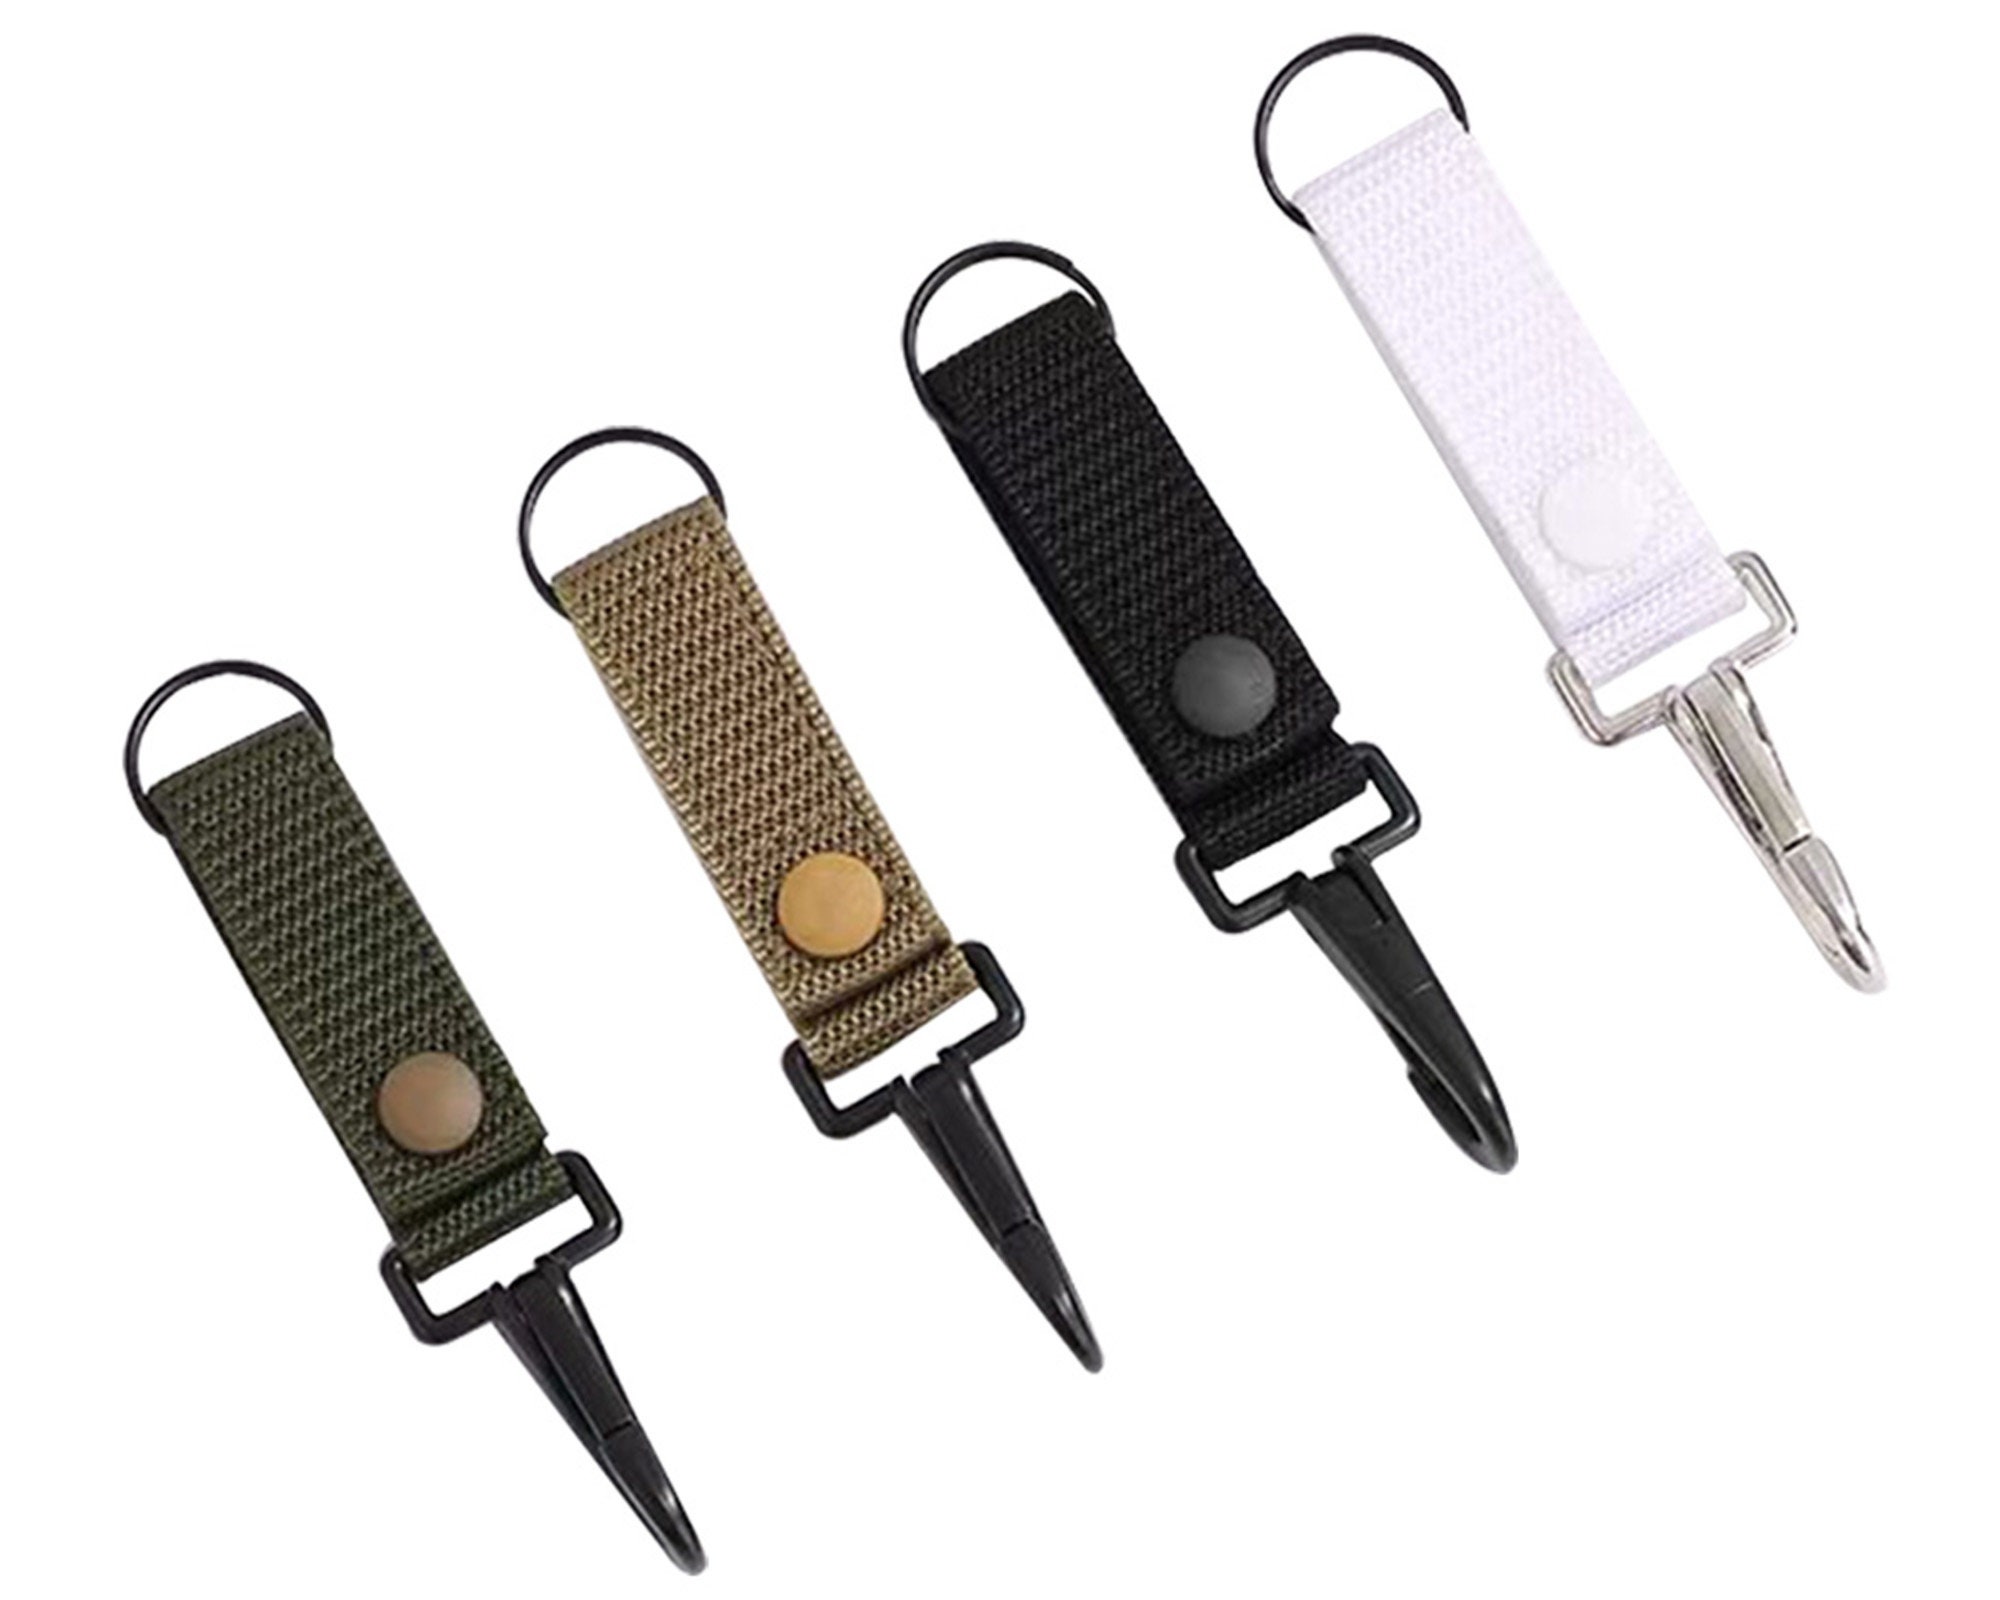 4Pcs Duty Belt Keeper with Double Snaps Security Tactical Belt Keepers